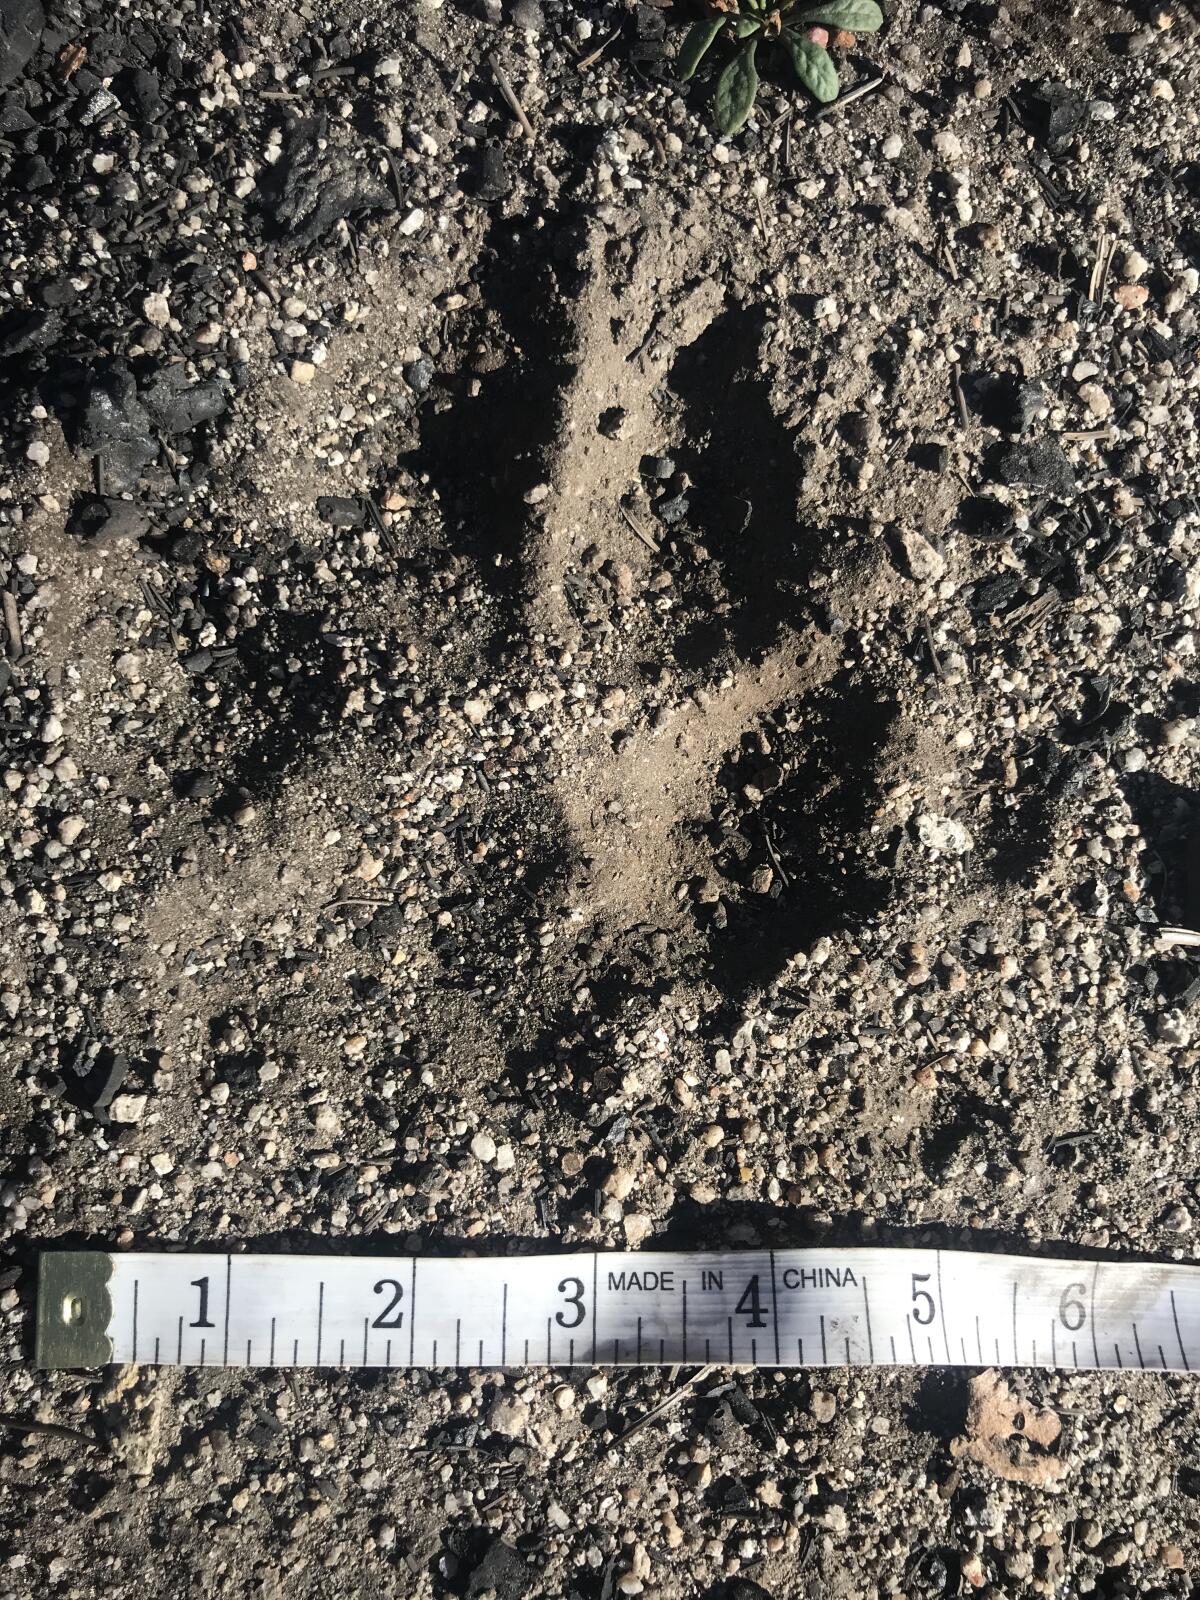 A tape measure shows a wolf paw print is nearly 5 inches wide.